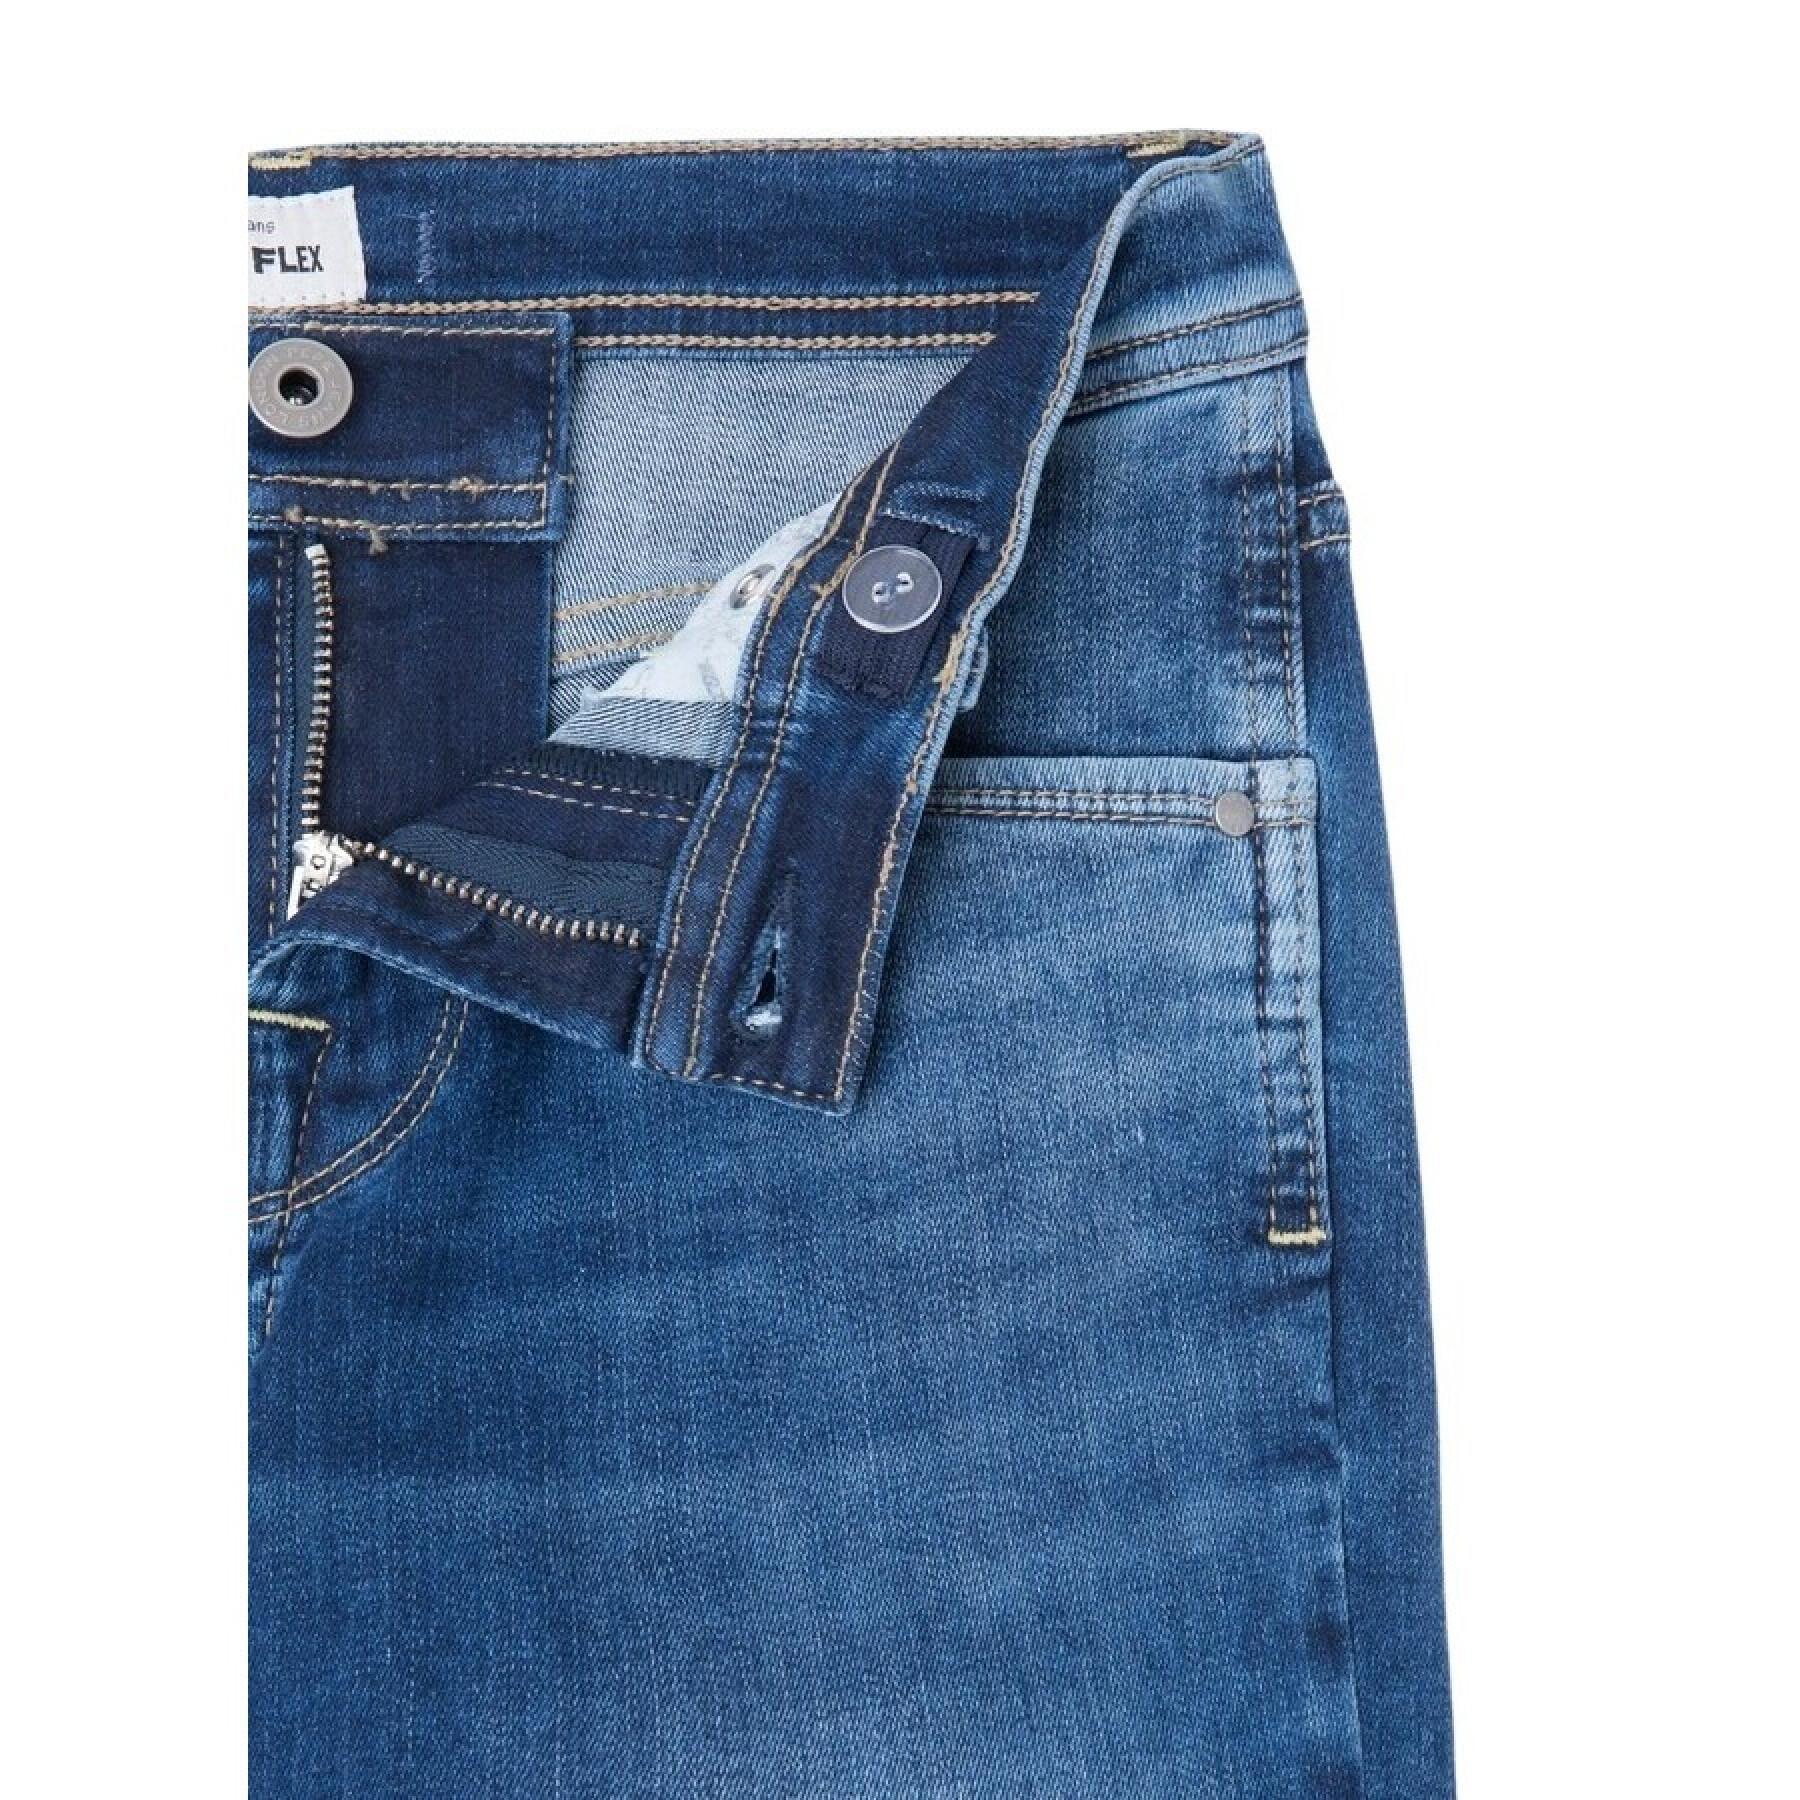 Children's jeans Pepe Jeans Cashed